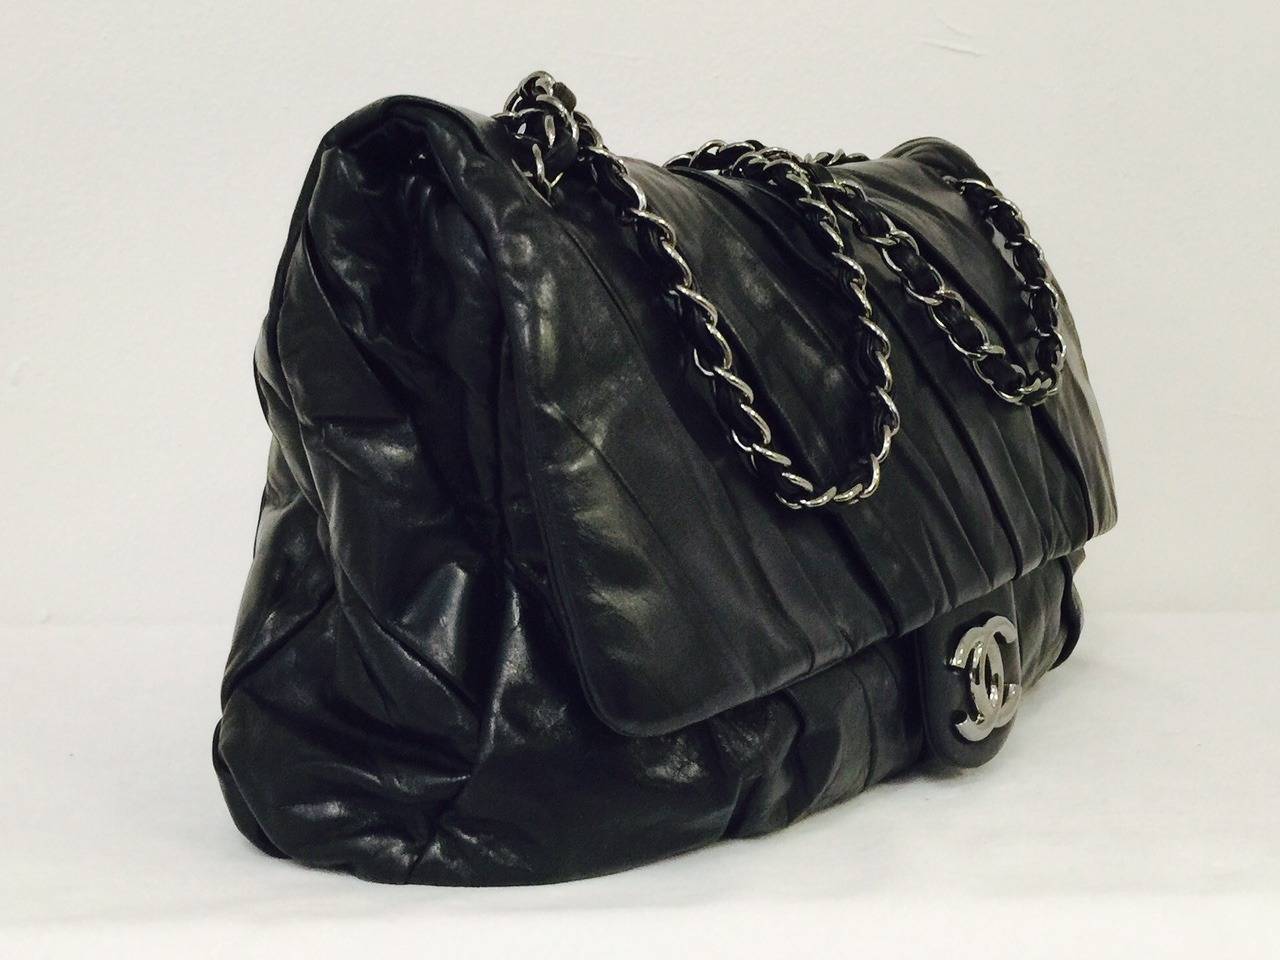 2009 Chanel Pleated Maxi Bag With Ruthenium Hardware In Excellent Condition For Sale In Palm Beach, FL